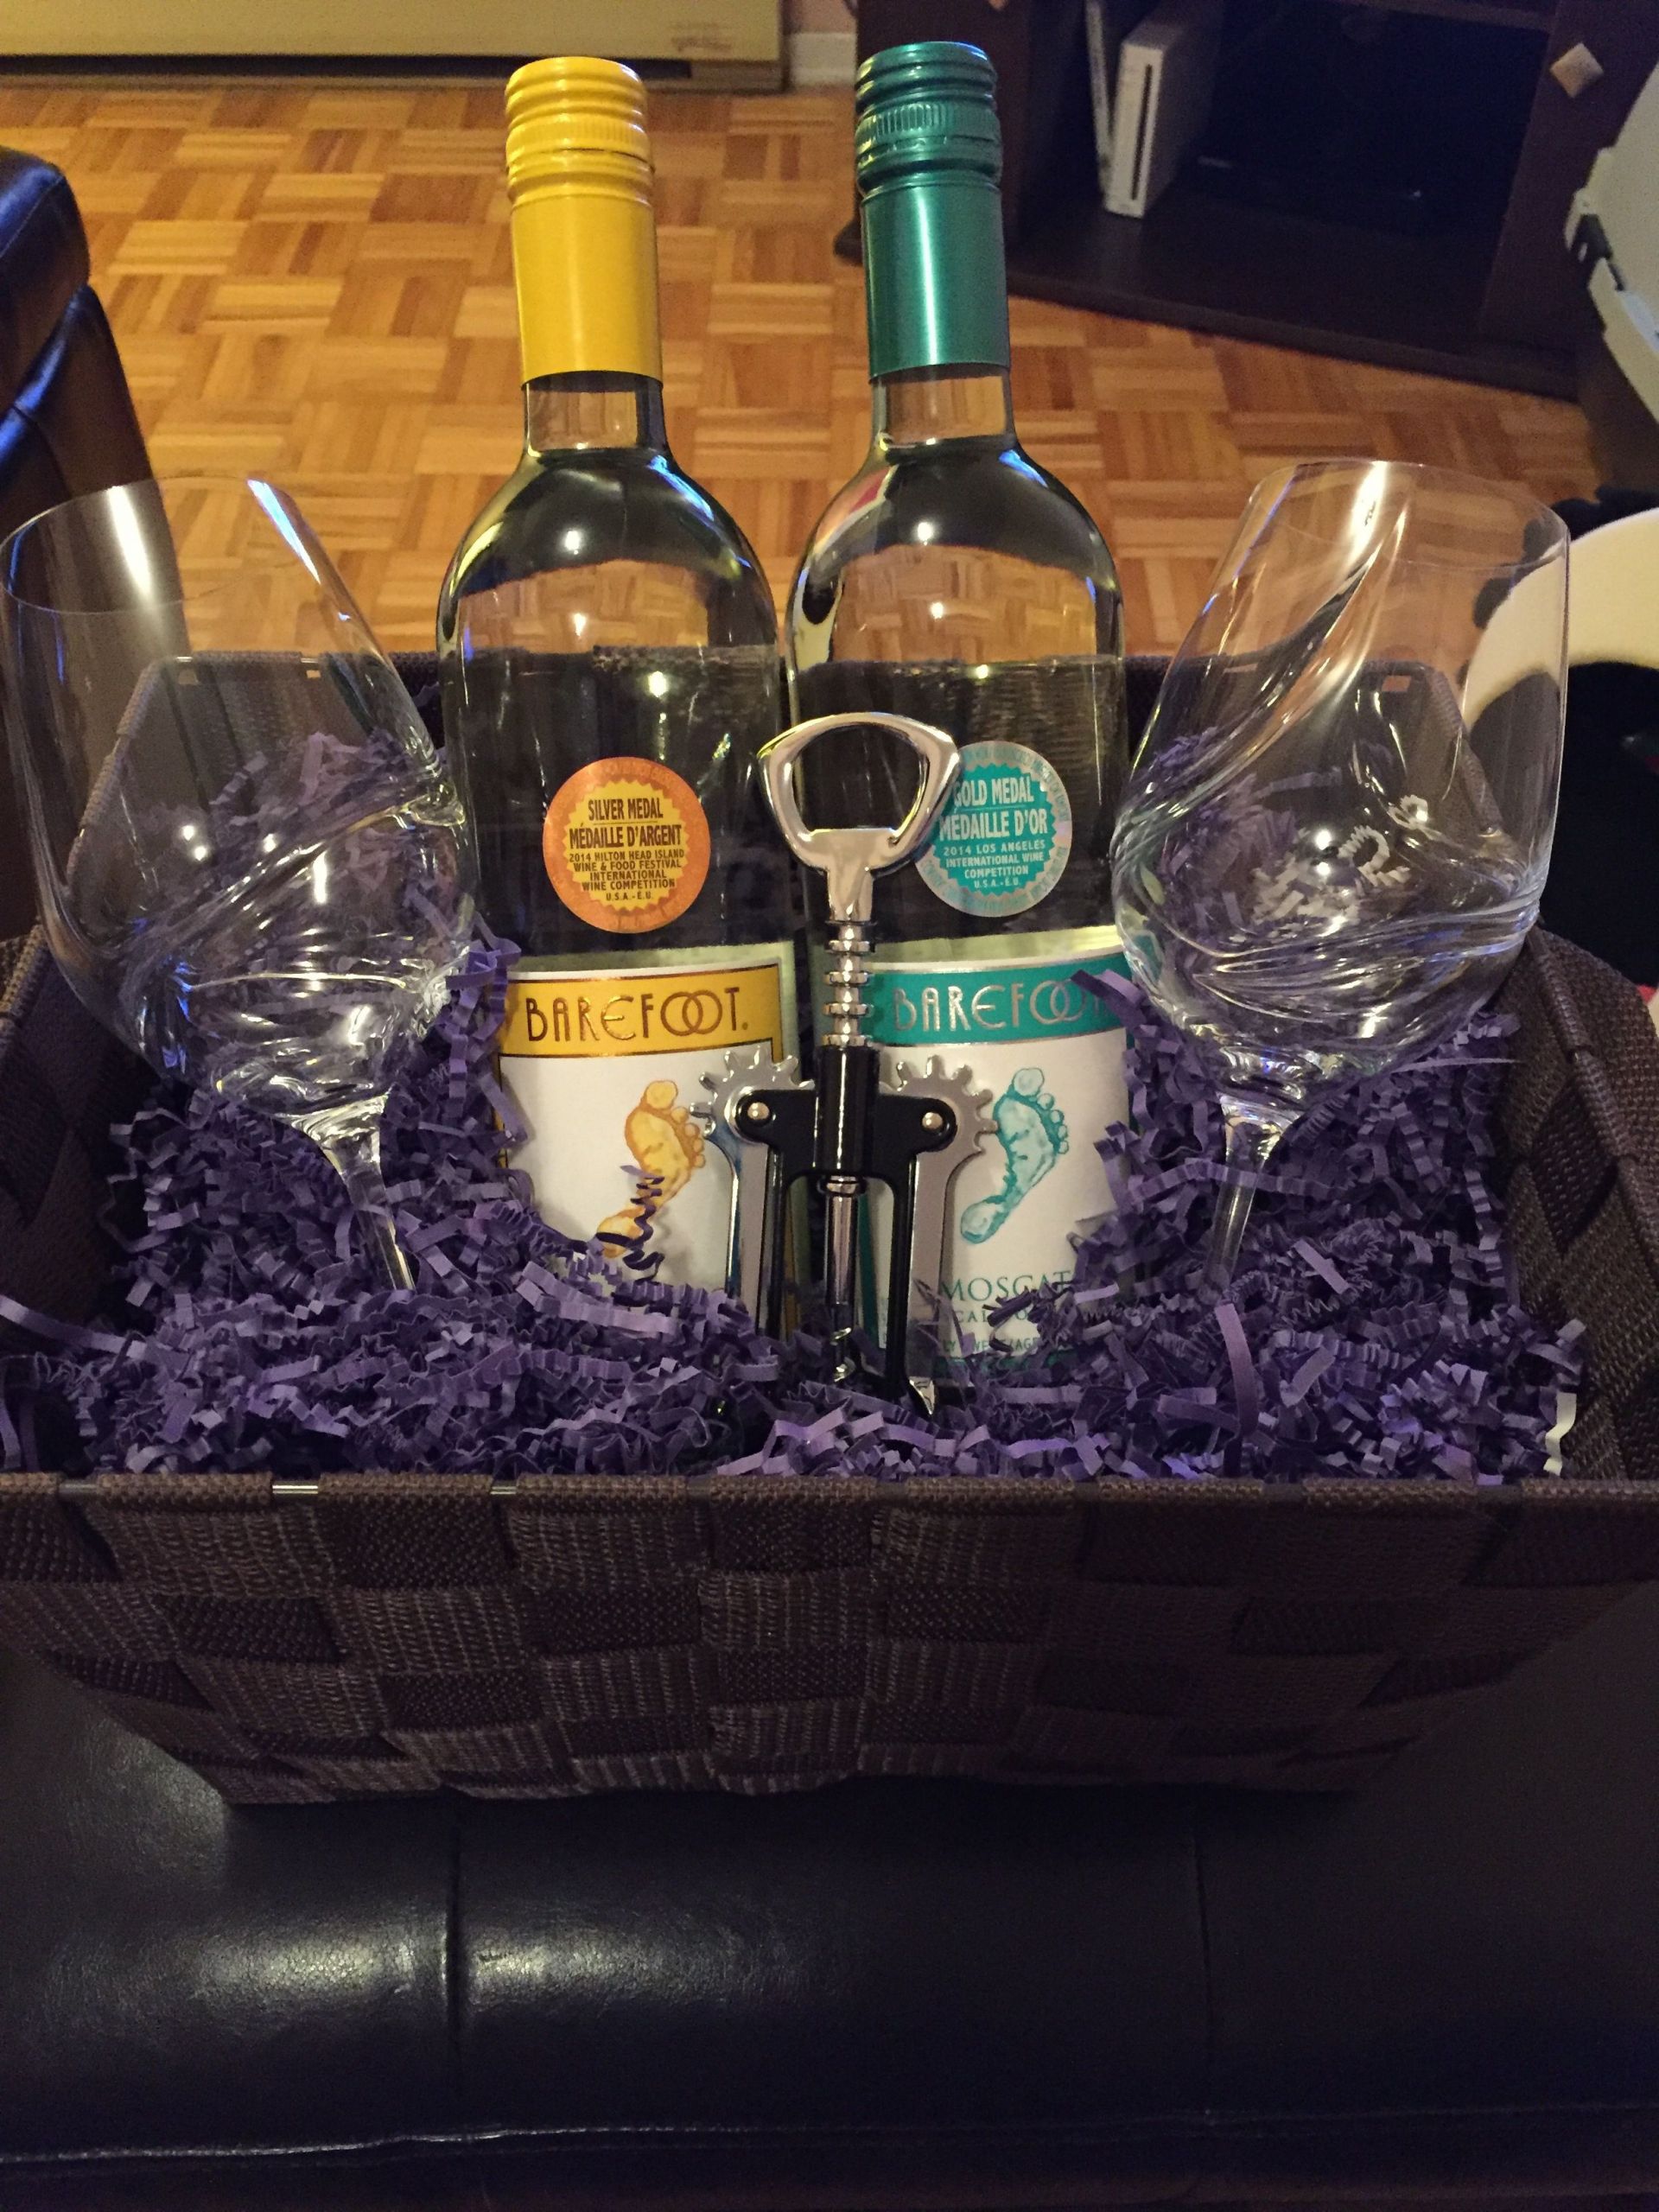 Wine Basket Gift Ideas
 Top 5 Ways to Open a Bottle of Wine Without a Corkscrew